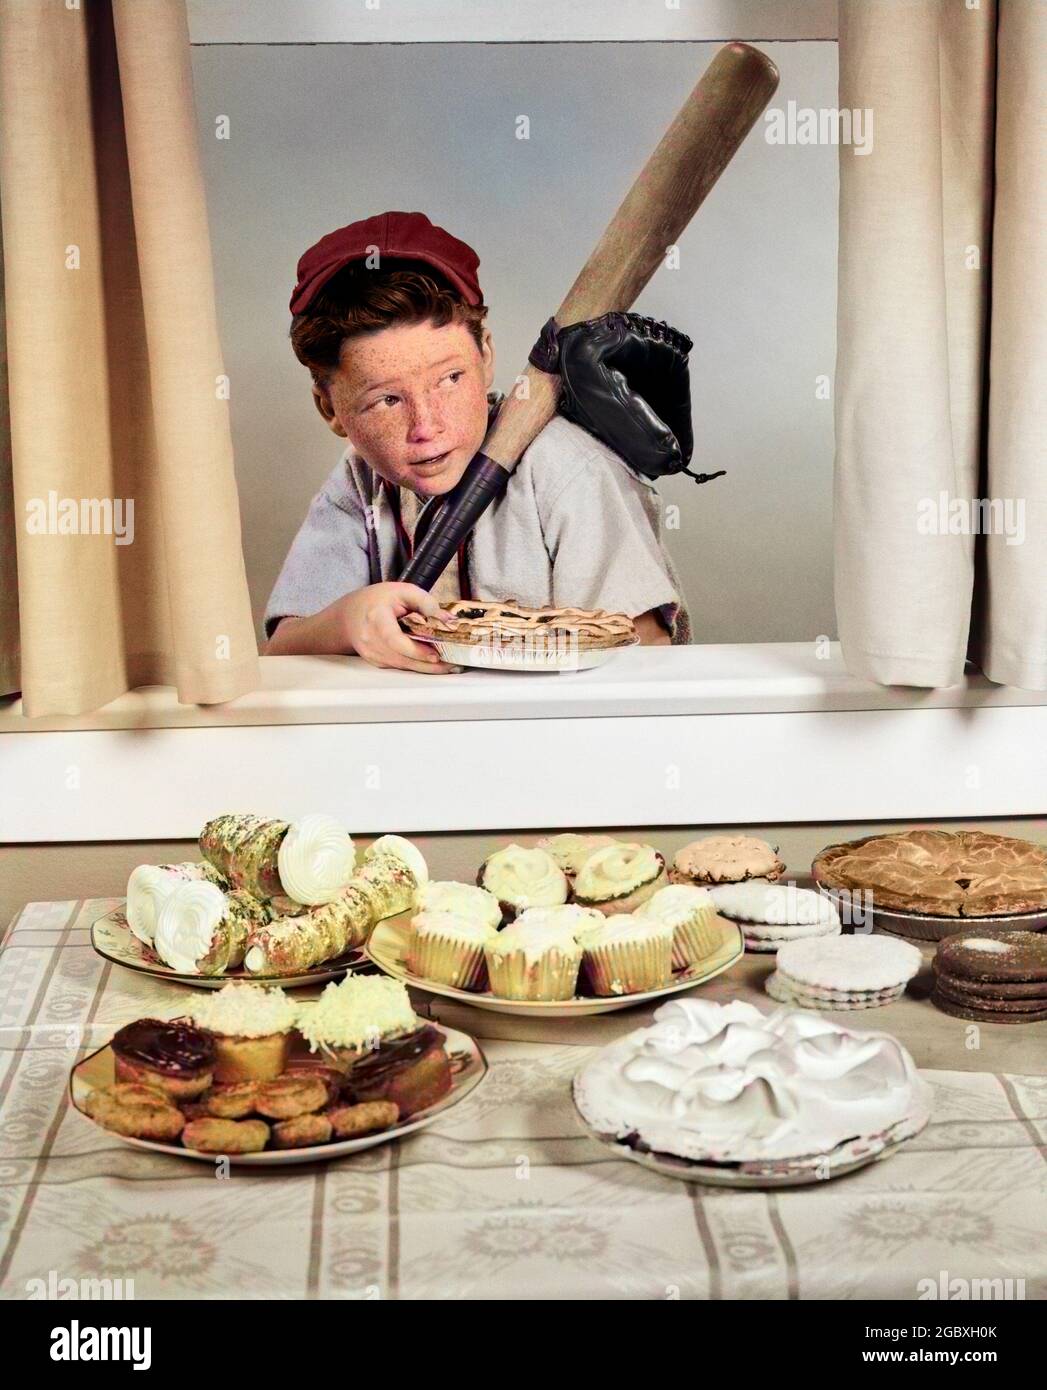 1950s BOY IN BASEBALL GARB WITH BAT SNEAKING PIE THROUGH OPEN WINDOW - j612c HAR001 HARS JUVENILE FEAR SECURITY SWEET MYSTERY SNACK COOKIE STUDIO SHOT HEALTHINESS HOME LIFE PEOPLE CHILDREN PHYSICAL FITNESS ADOLESCENT TABLECLOTH RISK BAKED DESSERT AMERICANA ICING FOODS STEALING SNACK FOODS WINDOWS THIEF PASTRY CUPCAKE SNACKS SINGULAR TEMPTATION MERINGUE HEAD AND SHOULDERS GOODS MISCHIEF ARCHIVAL BAKED GOODS SNACK FOOD MITT CHOICE EXCITEMENT TABLETOP FROSTING SNEAKING PRETEEN SUGARY FROSTED BASEBALL GLOVE BASEBALL HAT ESCAPE SNEAKY BASEBALL CAP BASEBALL MITT LADYFINGER OPEN WINDOW PRE-TEEN Stock Photo